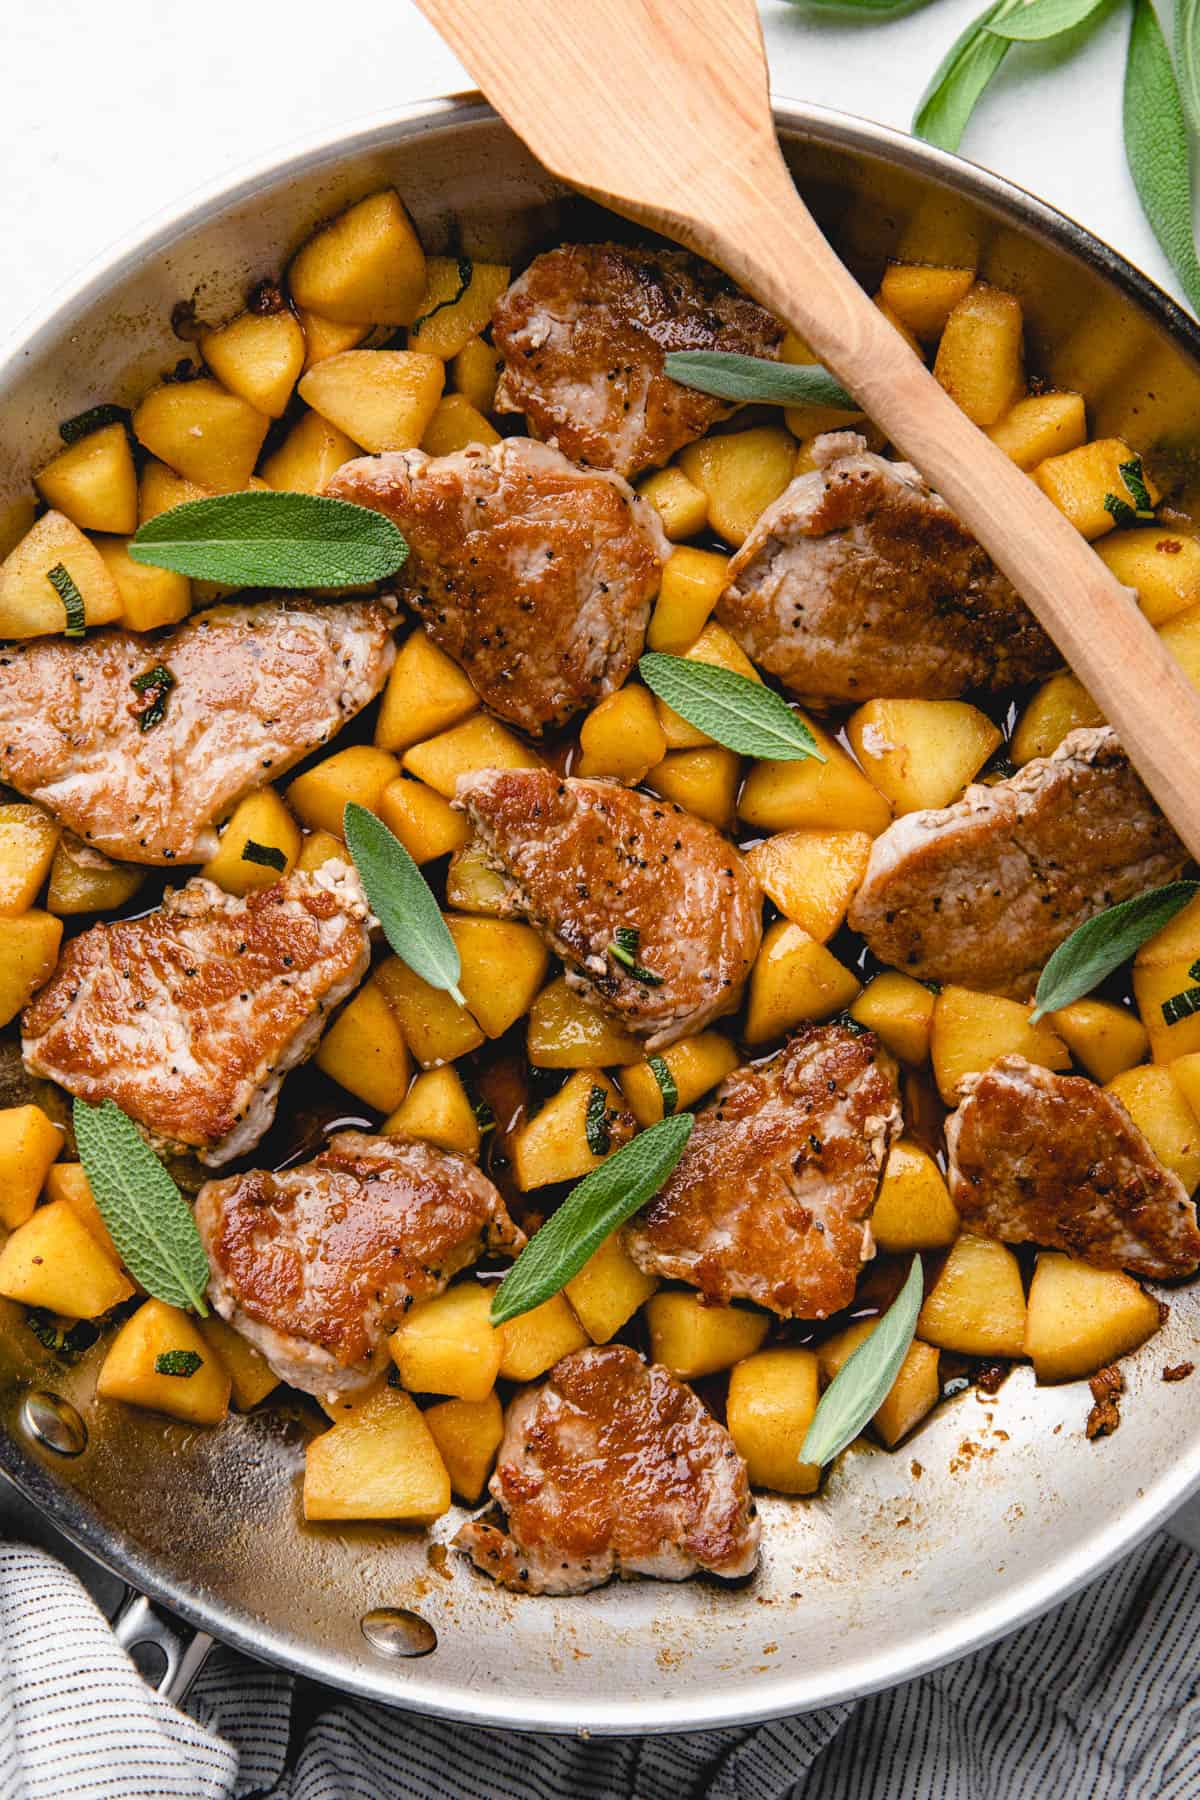 Pork medallions with caramelized apples in a skillet, topped with fresh sage leaves.